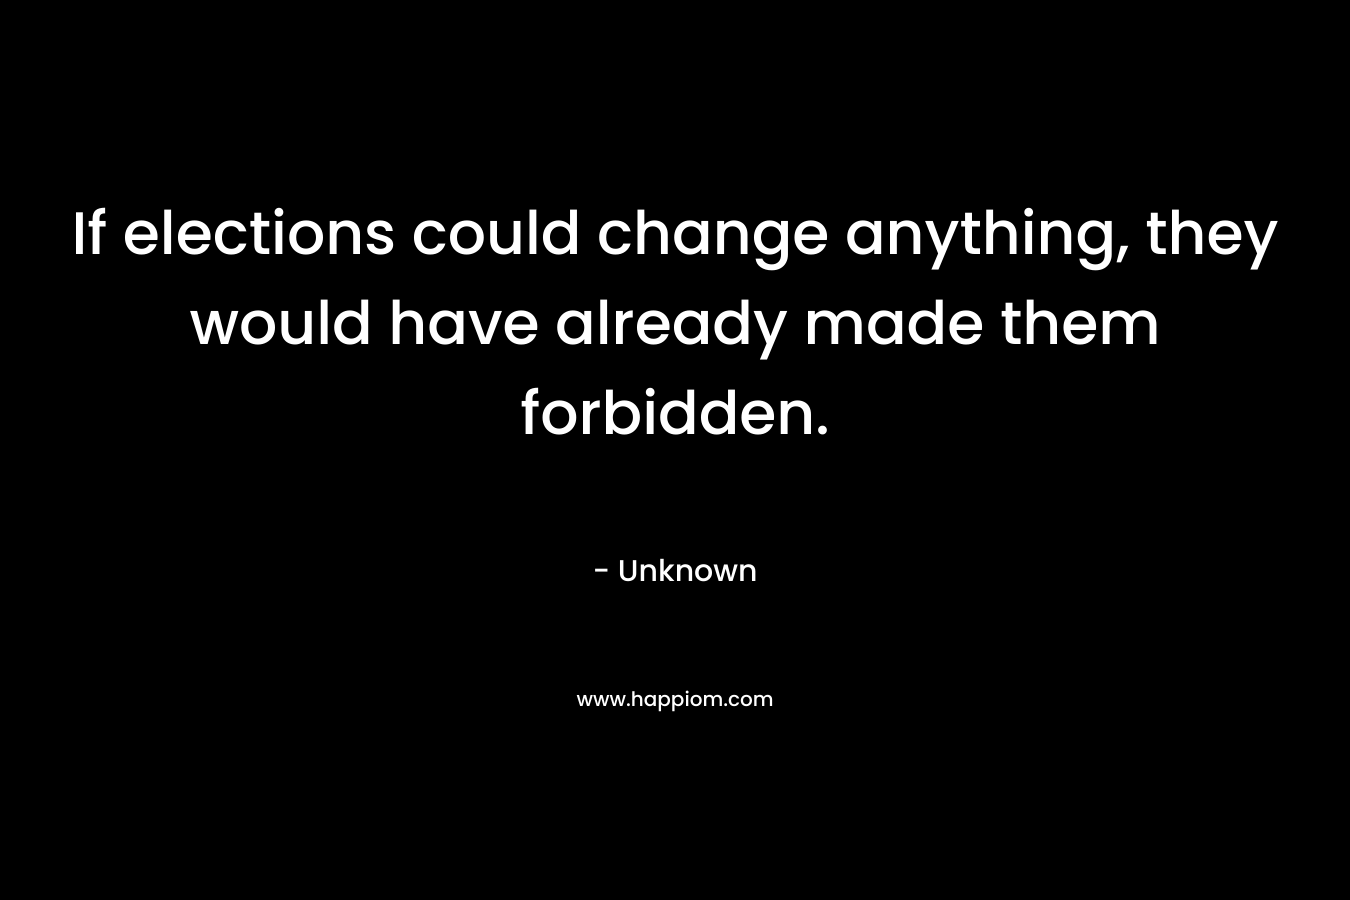 If elections could change anything, they would have already made them forbidden.